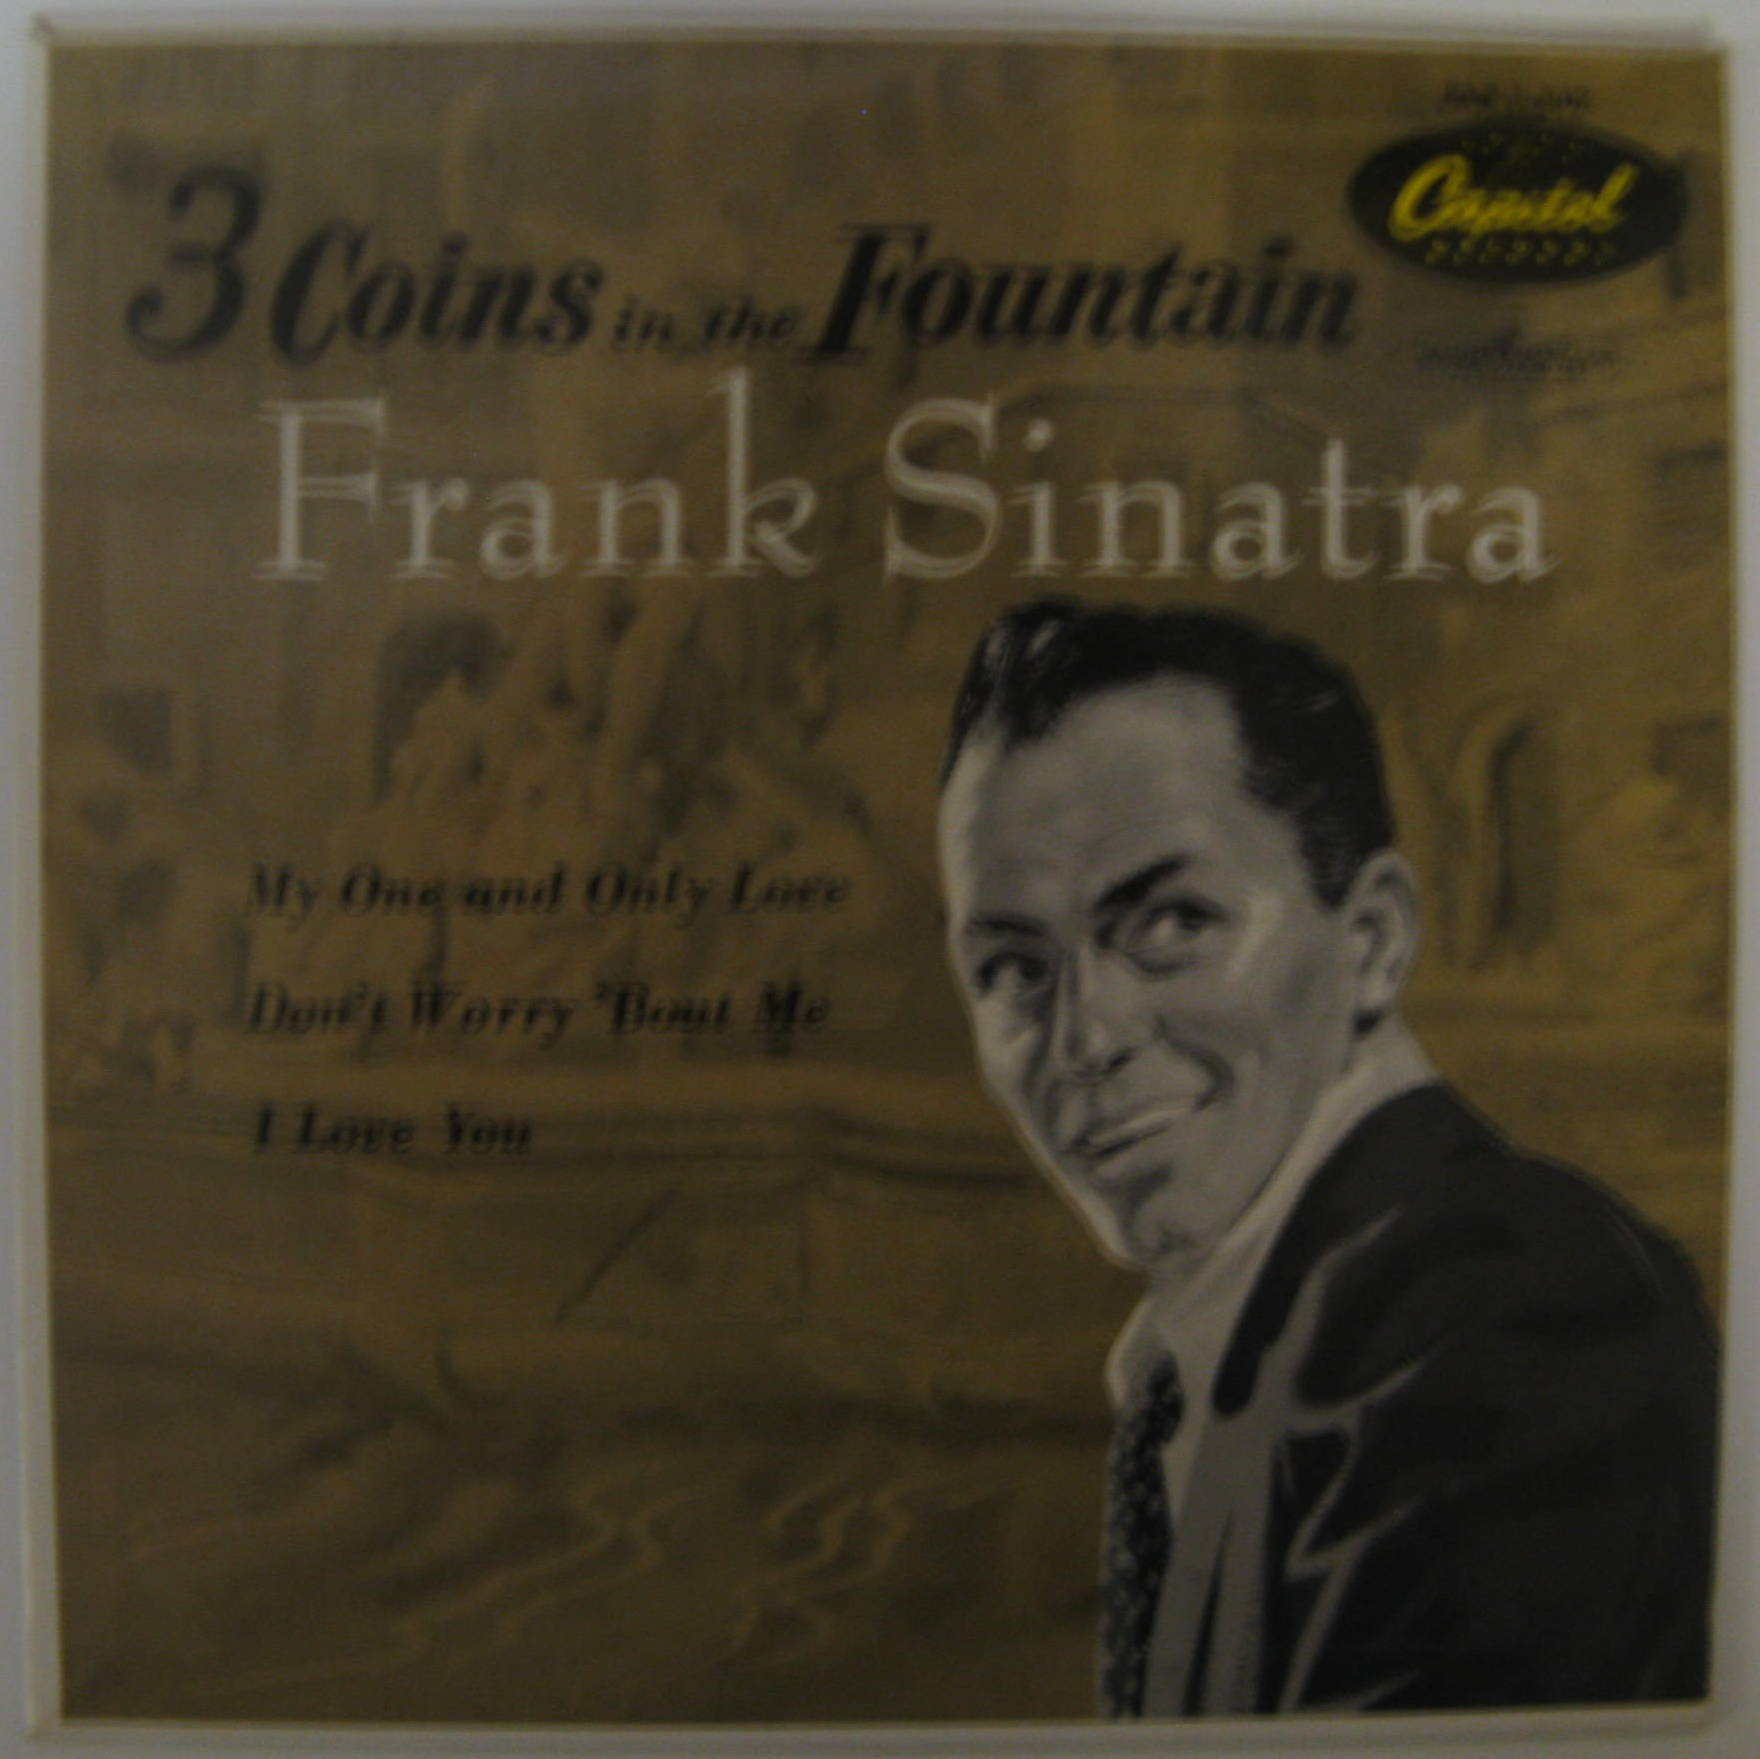 Frank Sinatra / 3 Coins In The Fountain EP